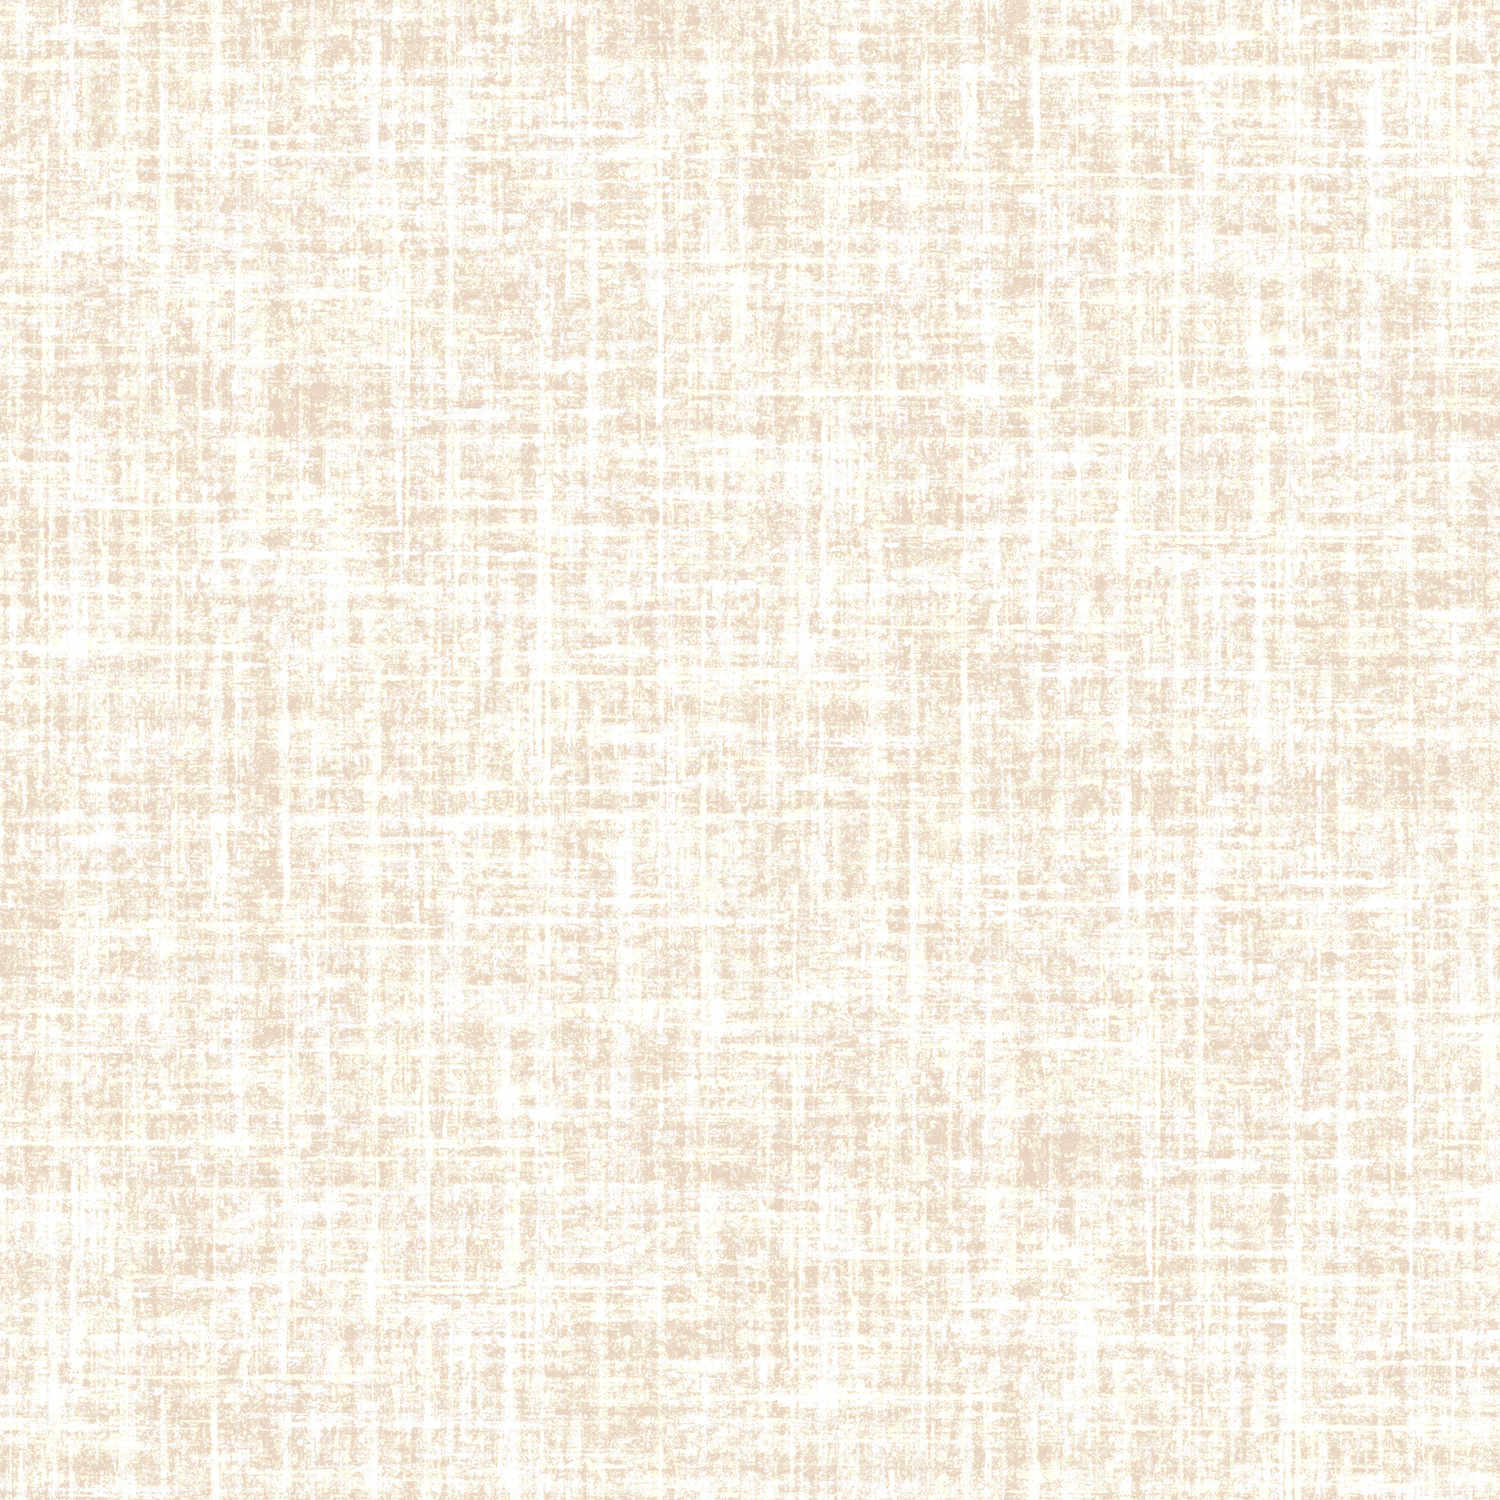 Woven Fabric Background